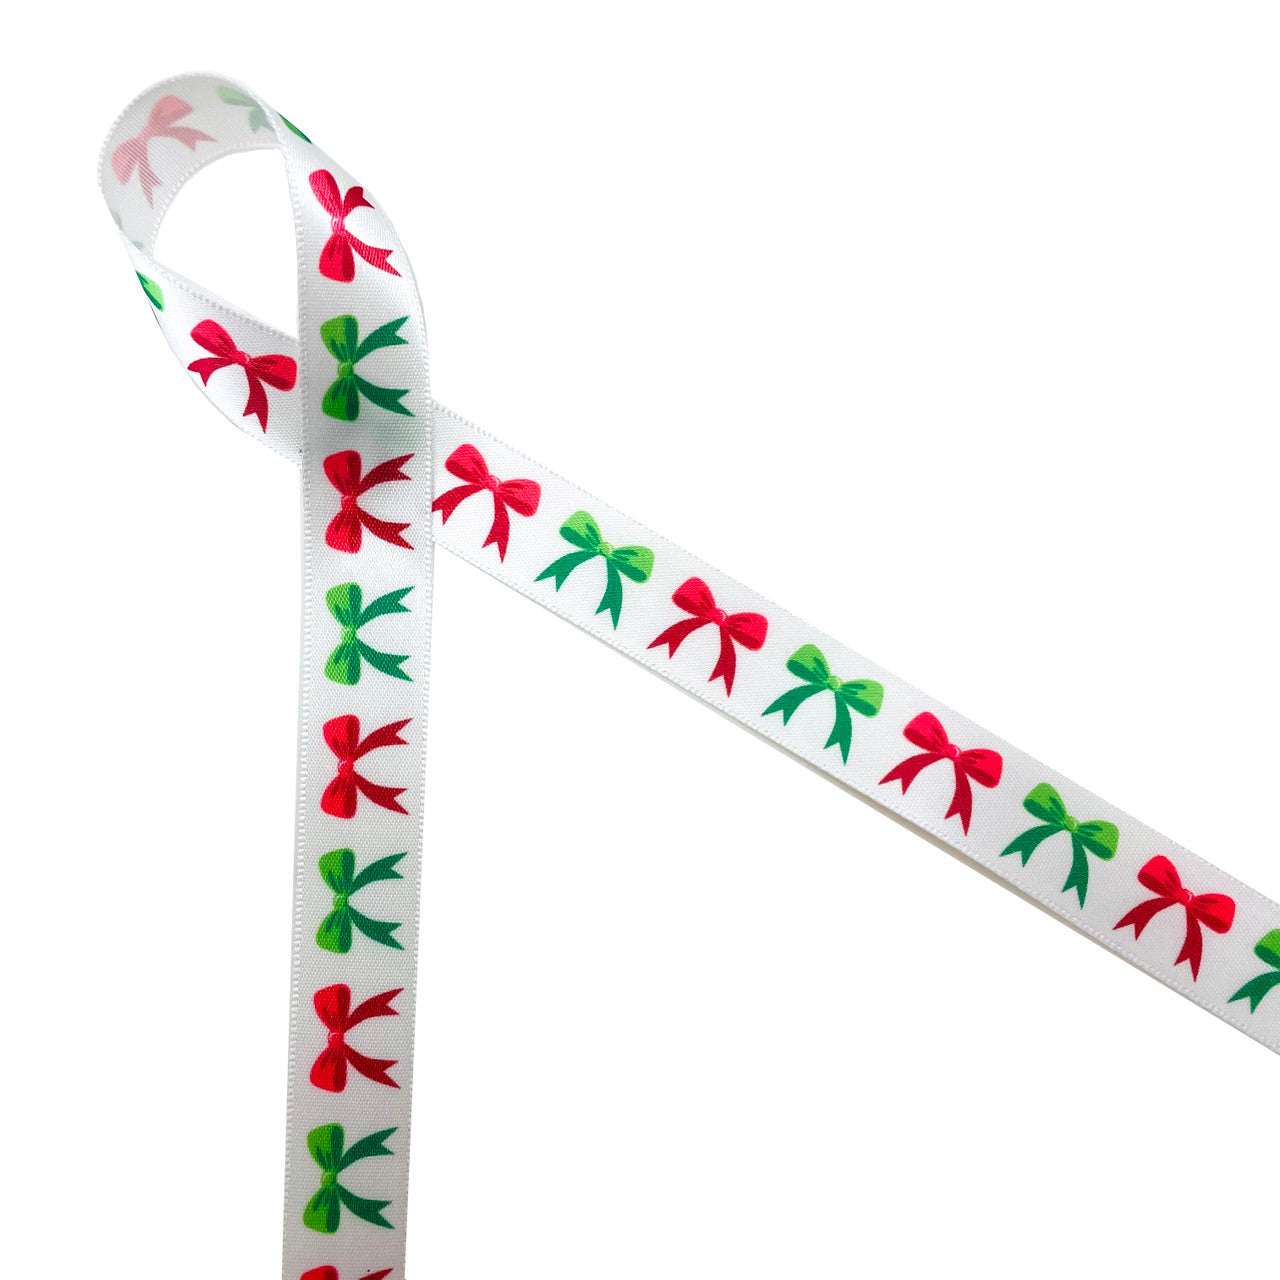 Christmas bows in red and green line up along a 5/8" white single face satin ribbon for Holiday gift wrap, gift baskets, cookies, chocolates and candy. This adorable ribbon is perfect for party favors, table decor, hair bows, crafts and quilting. All our ribbon is designed and printed in the USA